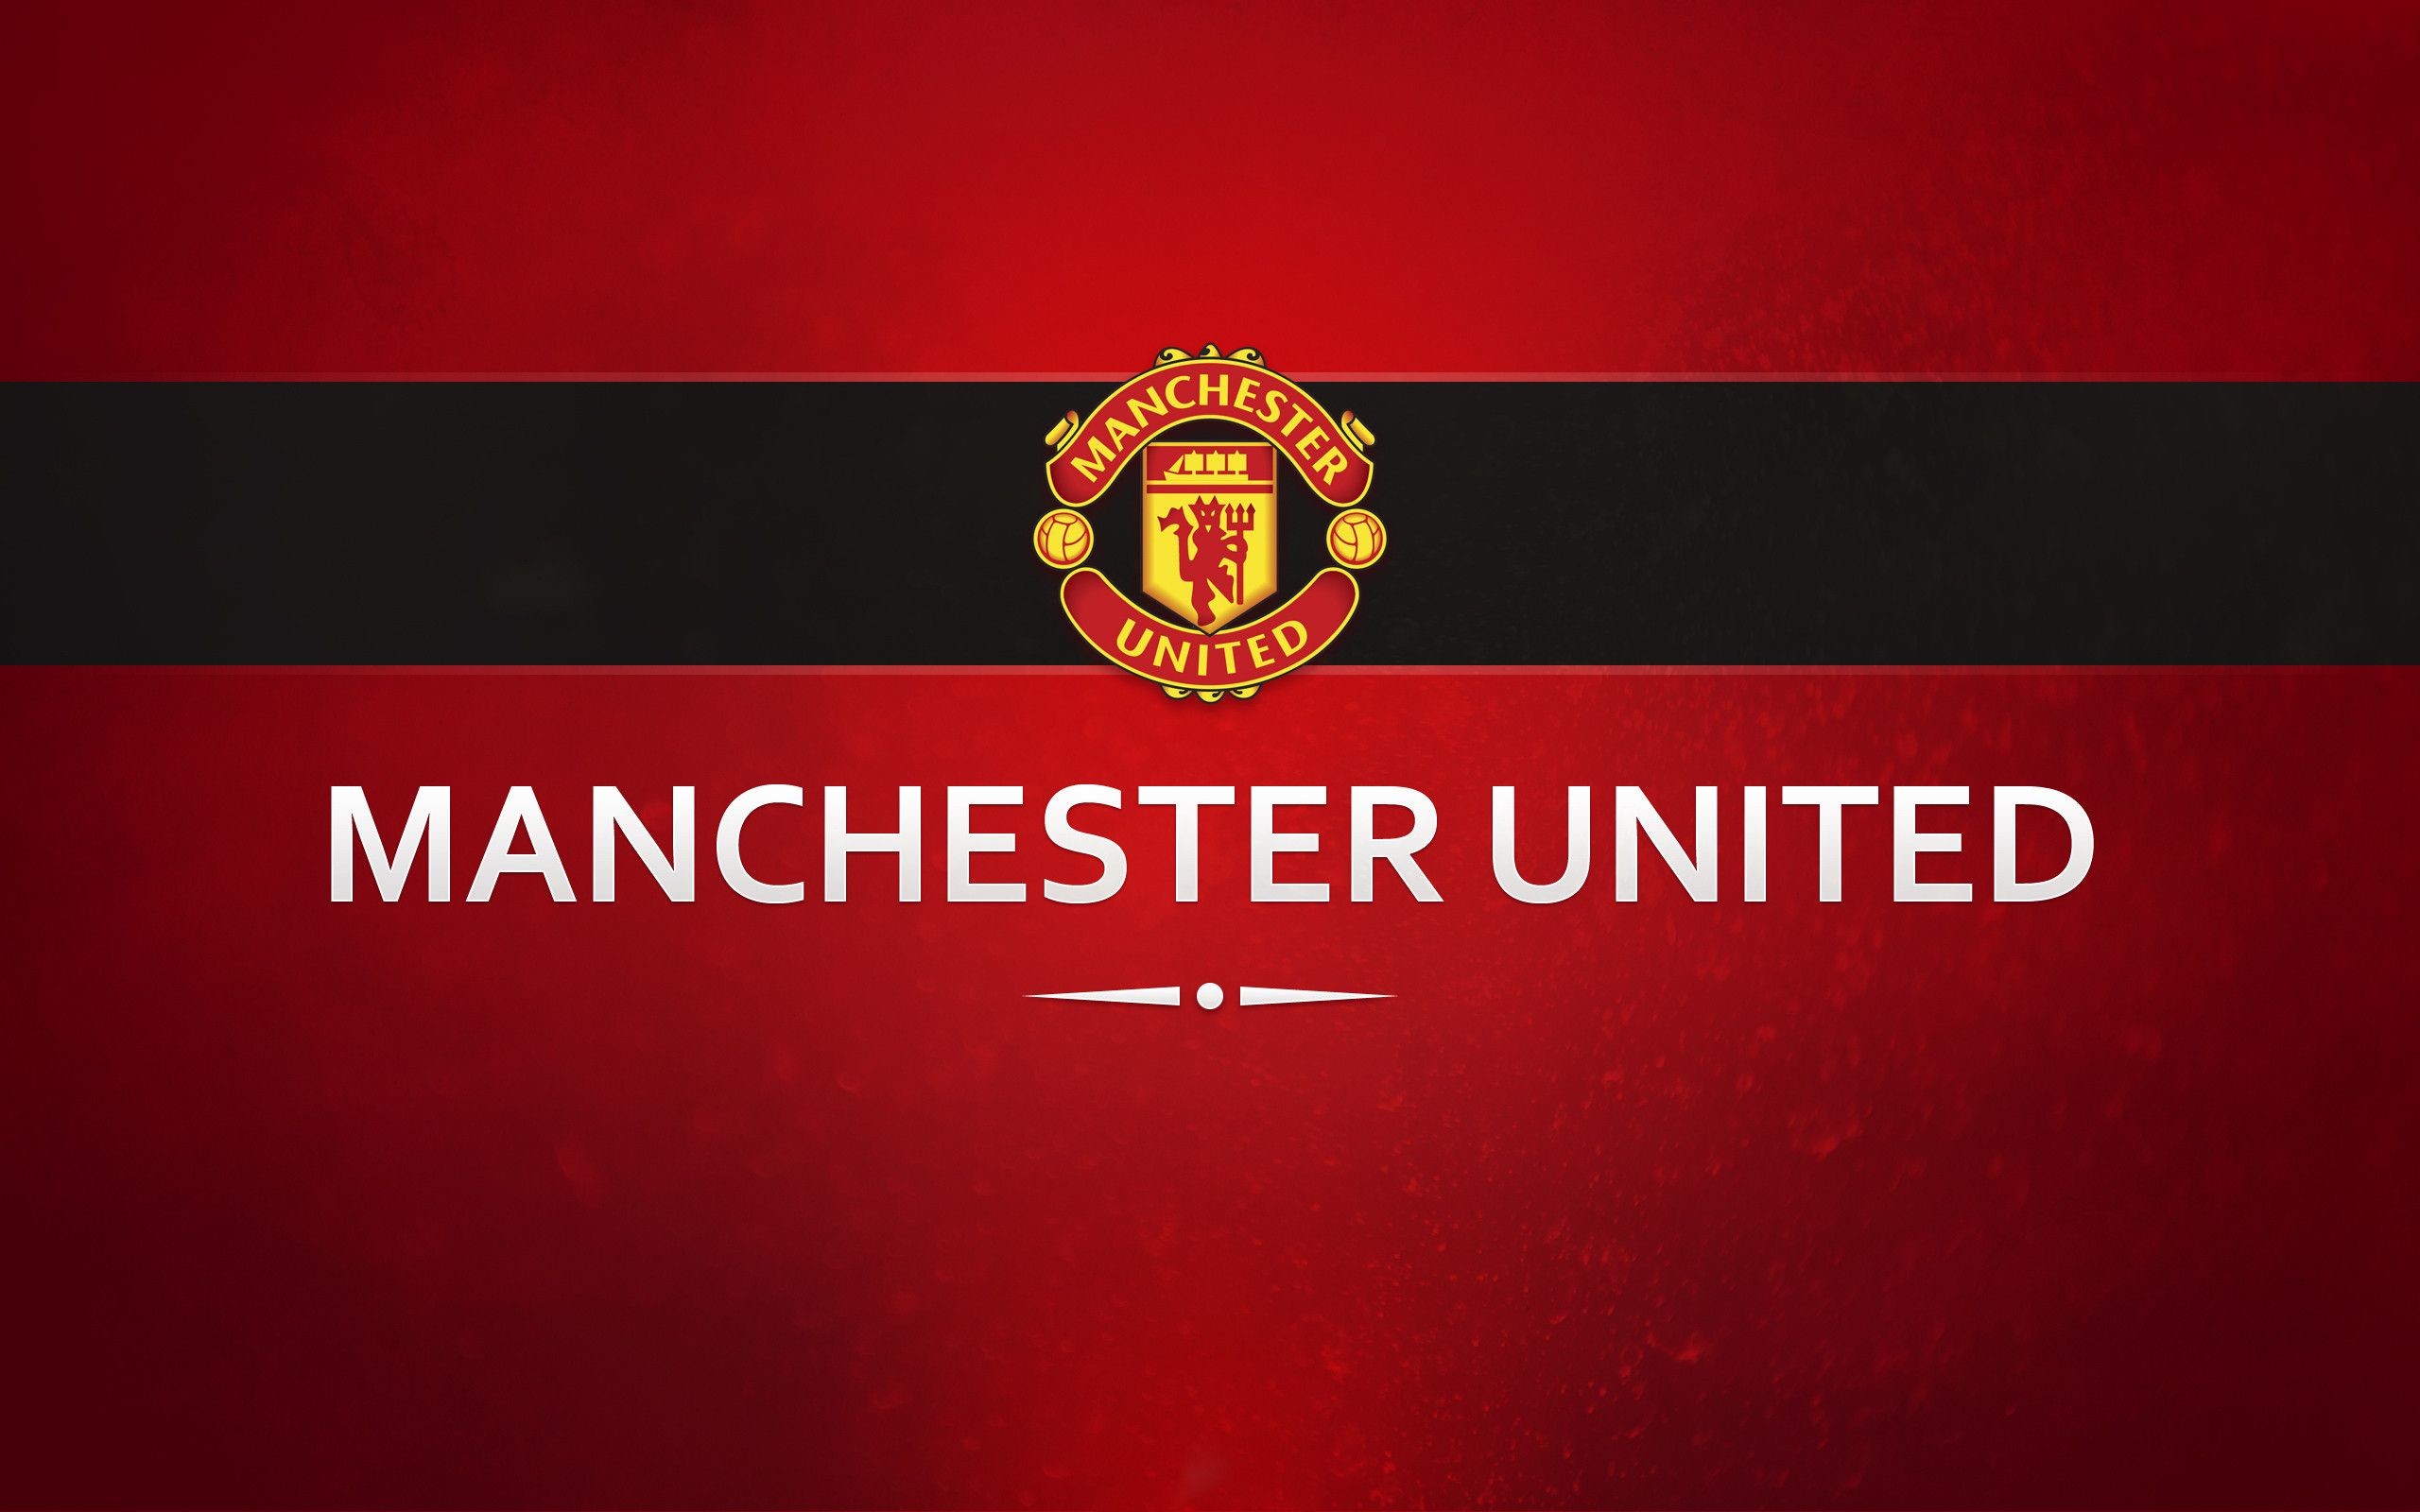 2560x1600 0 Manchester United Logo Wallpaper | WallpaperSafari Manchester United Logo Wallpapers  HD 2015 | Wallpaper Cave